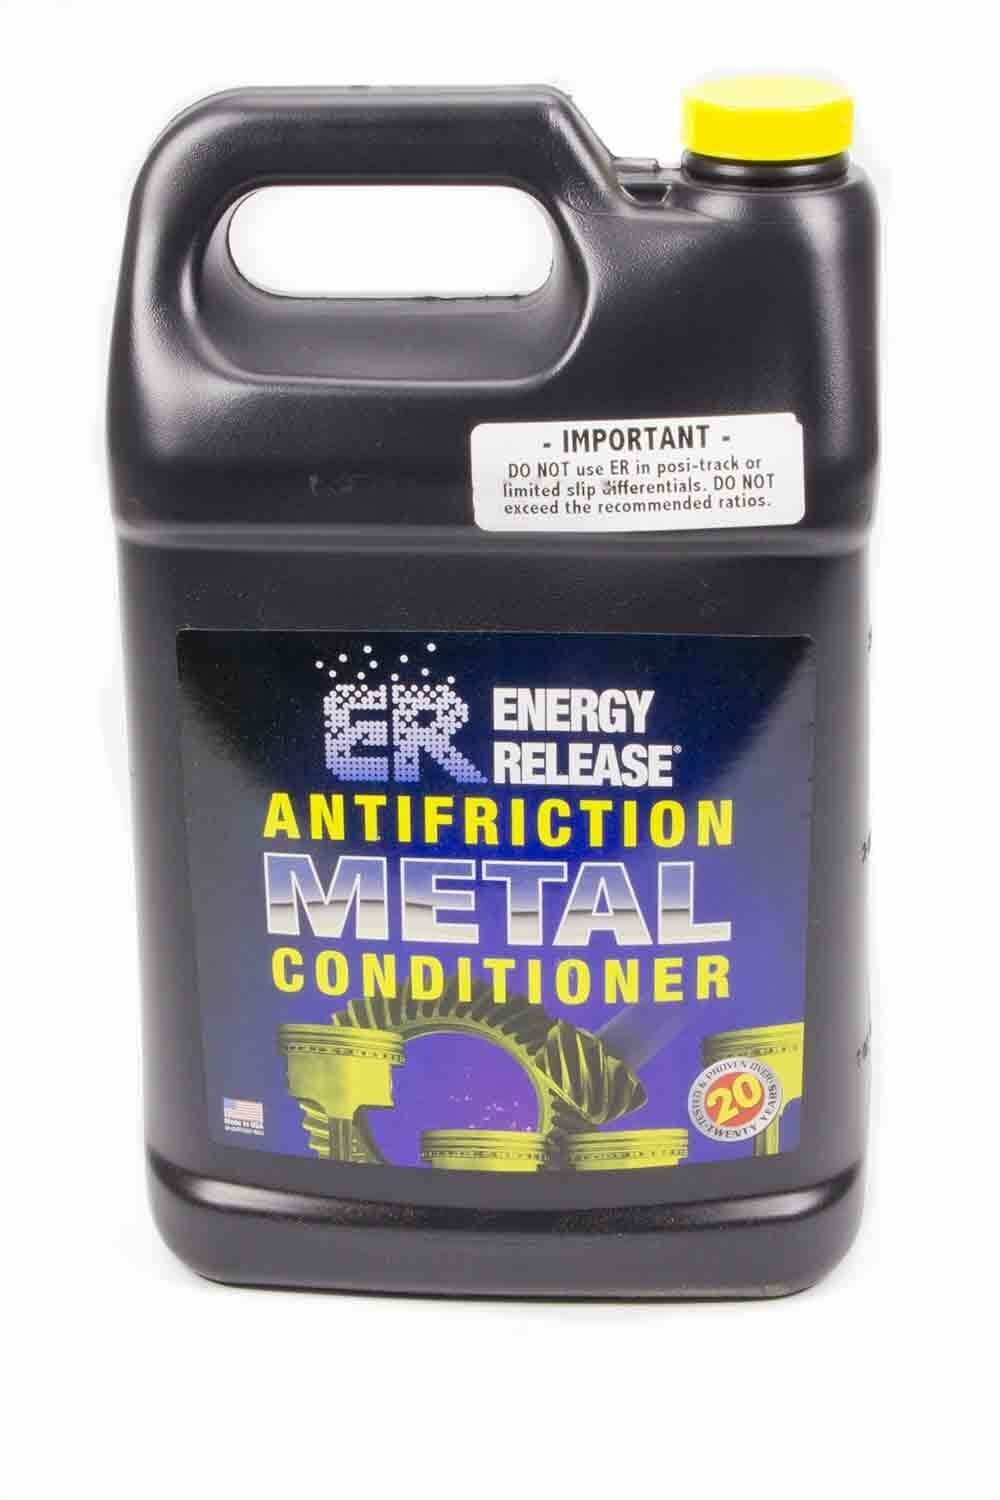 Antifriction Metal Conditioner Gallon ENERGY RELEASE P003